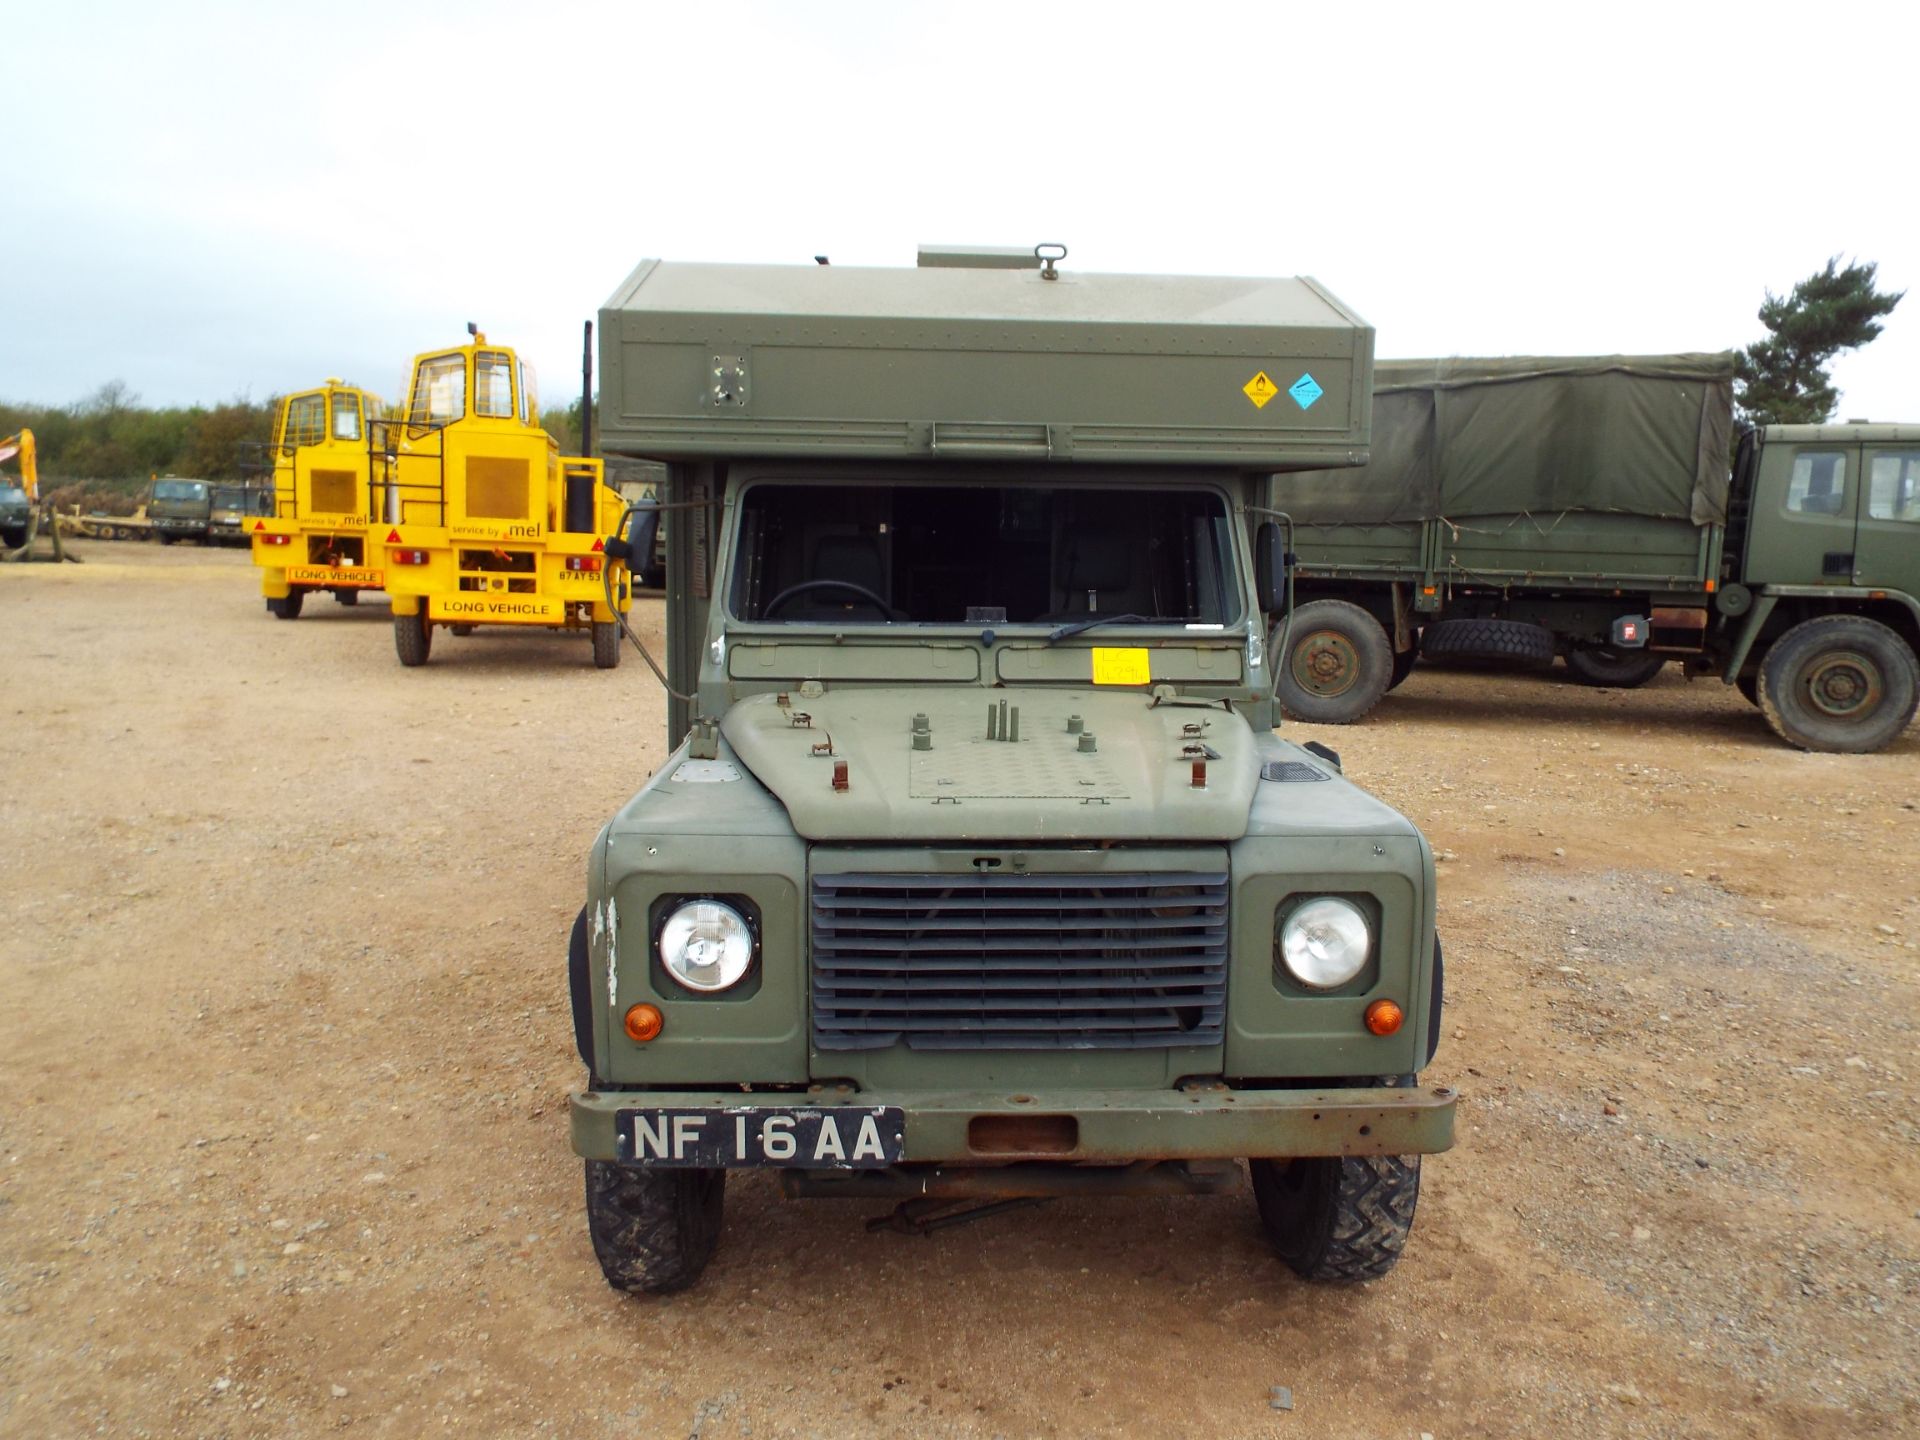 Military Specification Land Rover Wolf 130 ambulance - Image 2 of 28